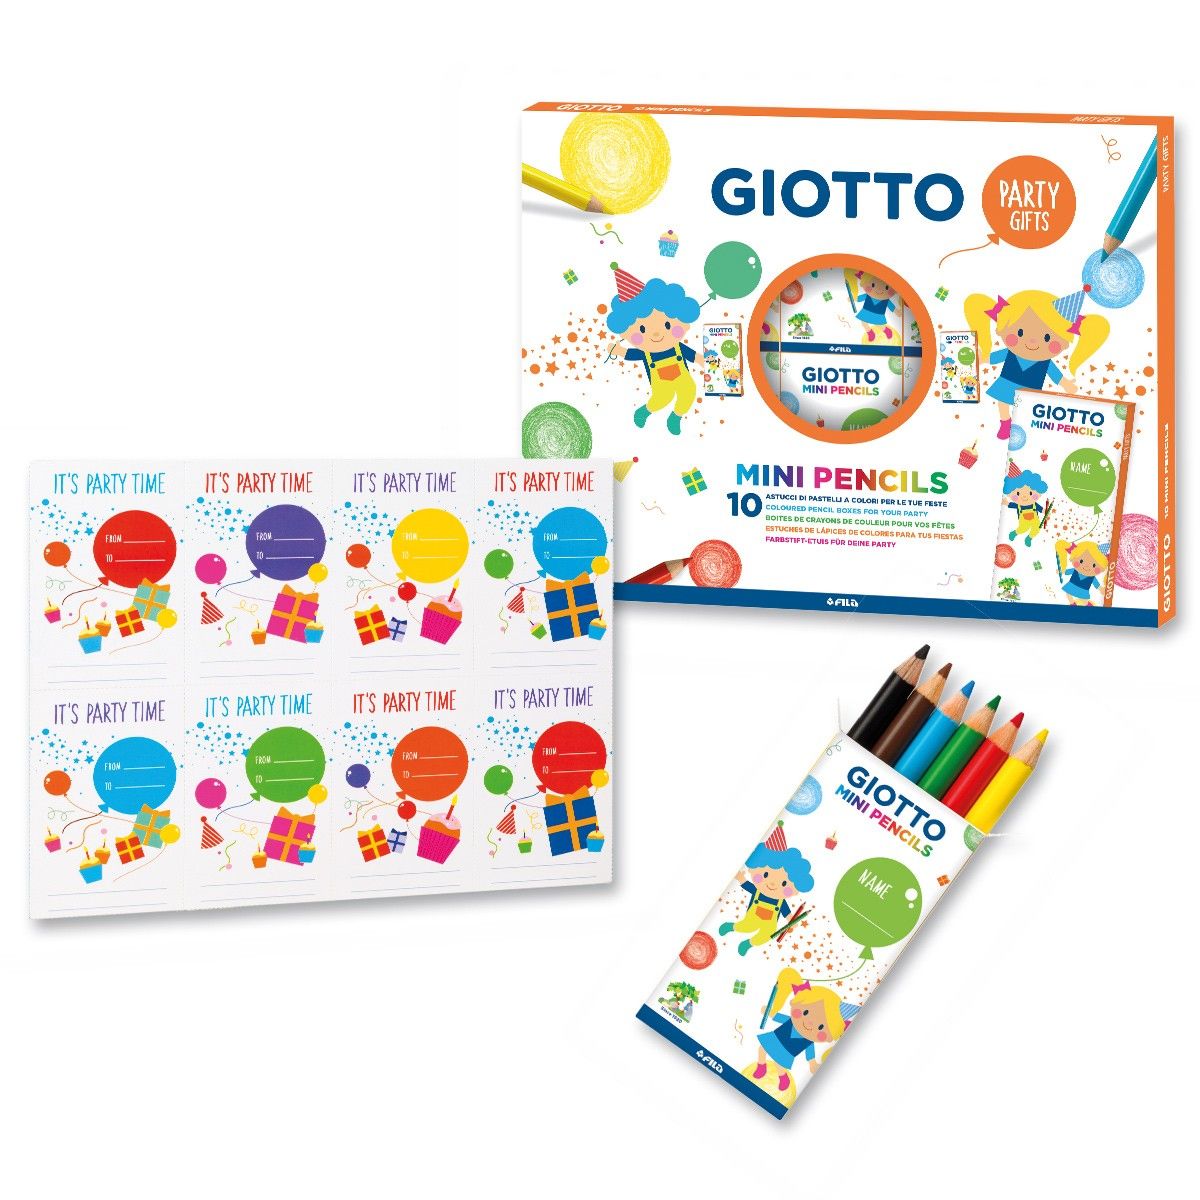 Giotto Party Gifts Mini Pencils